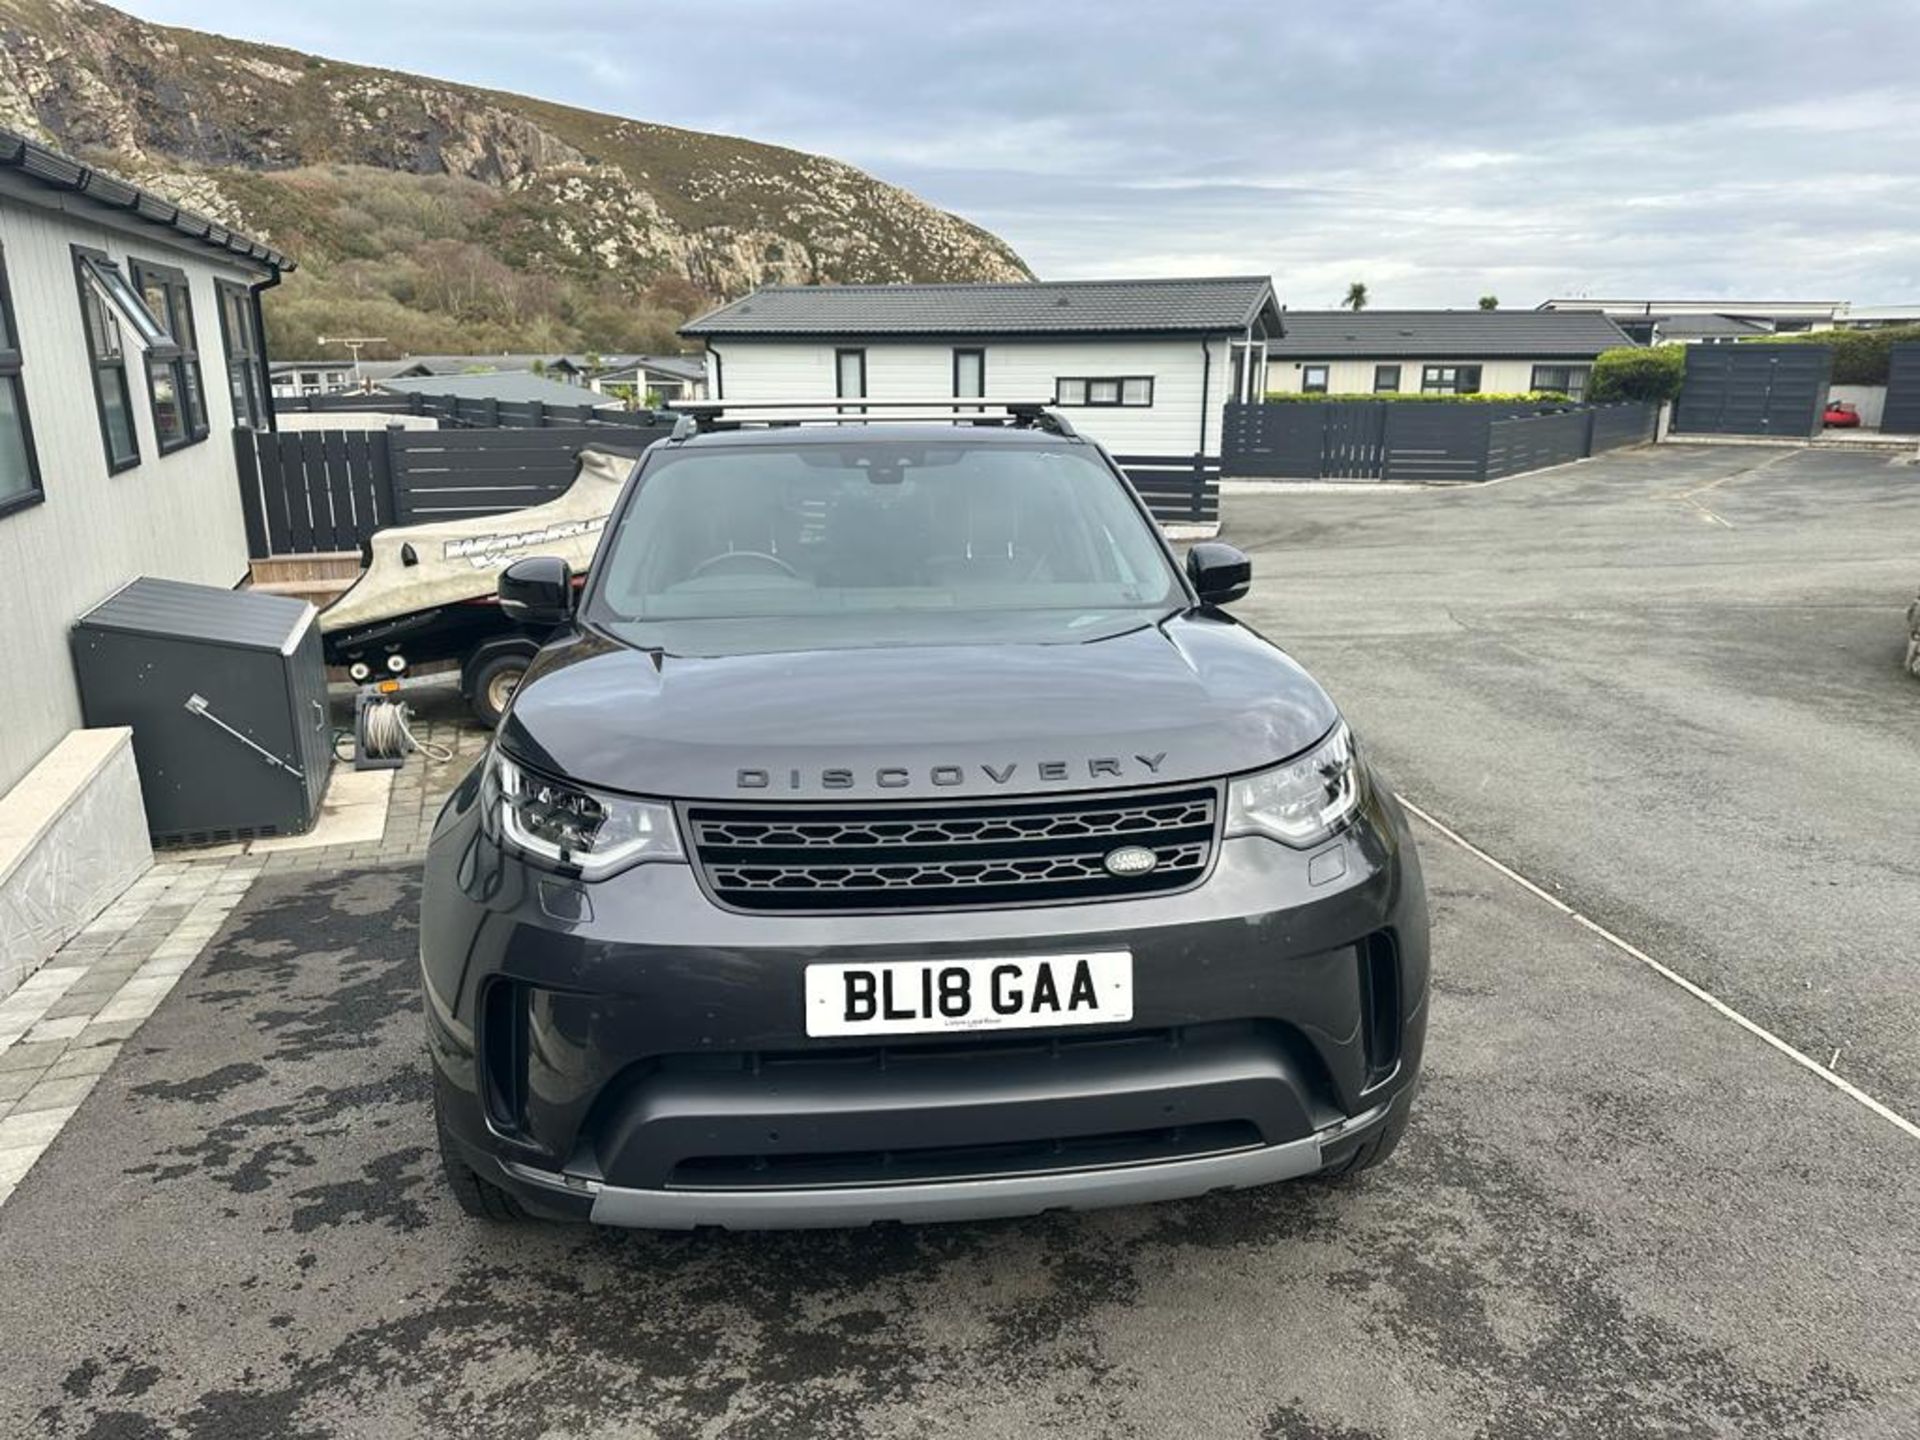 2018 LAND ROVER DISCOVERY HSE SD4 AUTO GREY SUV ESTATE *NO VAT* - Image 2 of 10